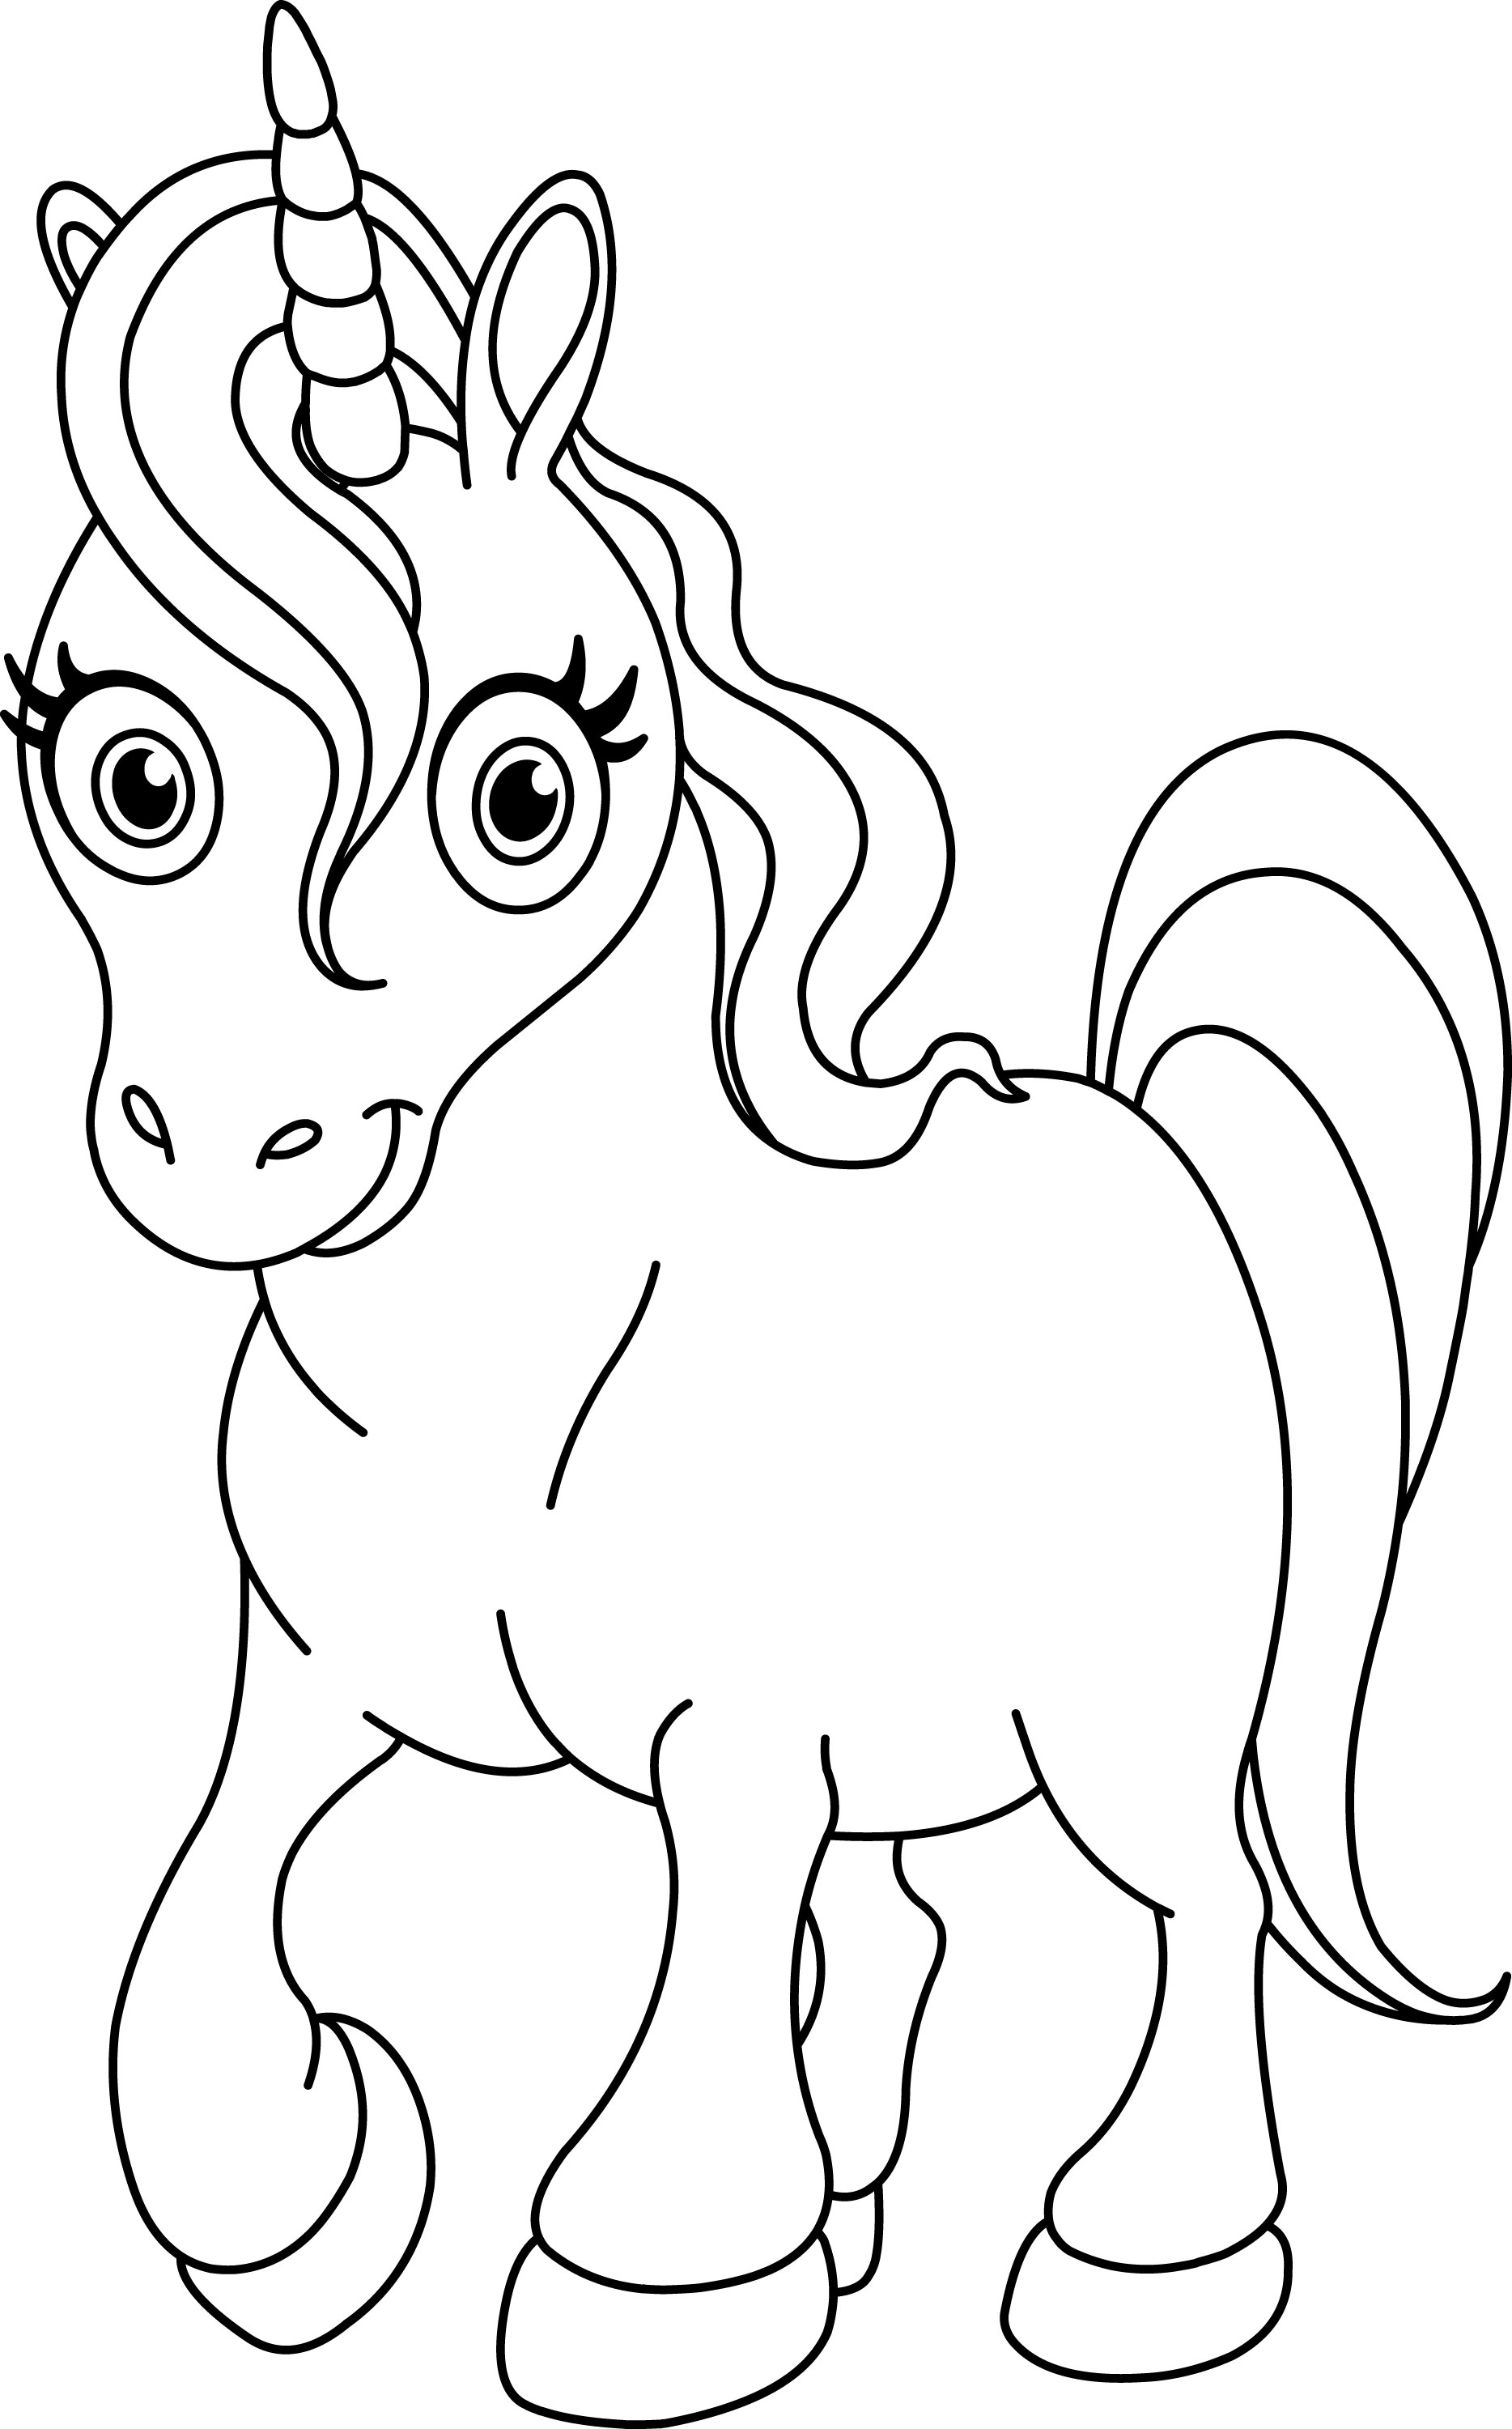 Unicorn Coloring Pages Pdf at GetDrawings | Free download